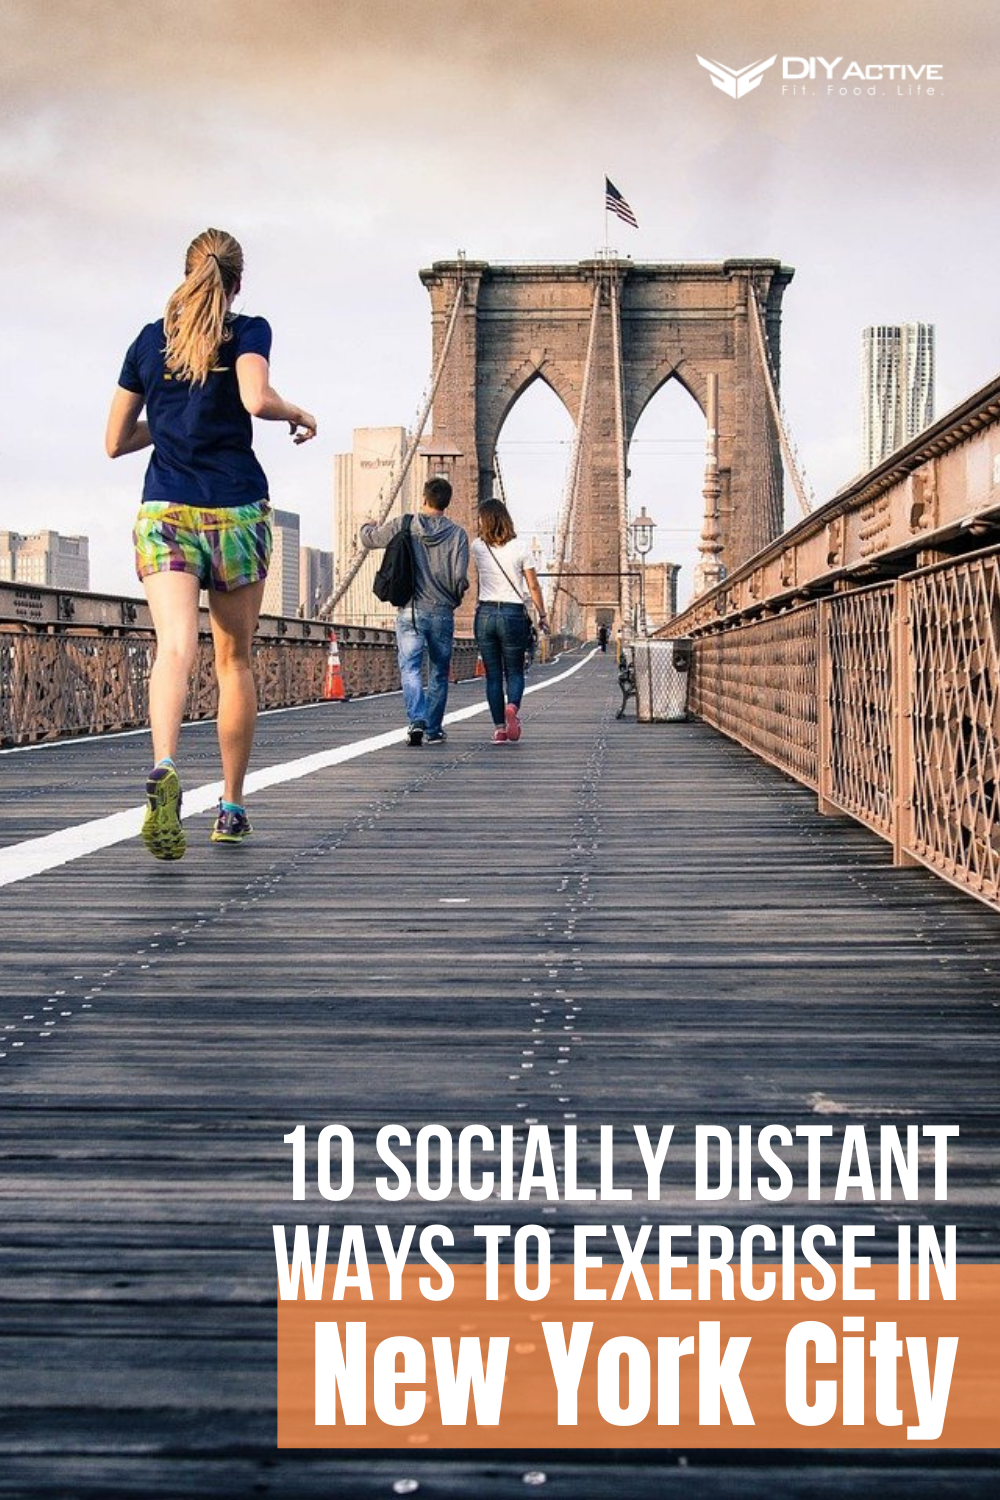 10 Socially Distant Ways to Exercise in New York City